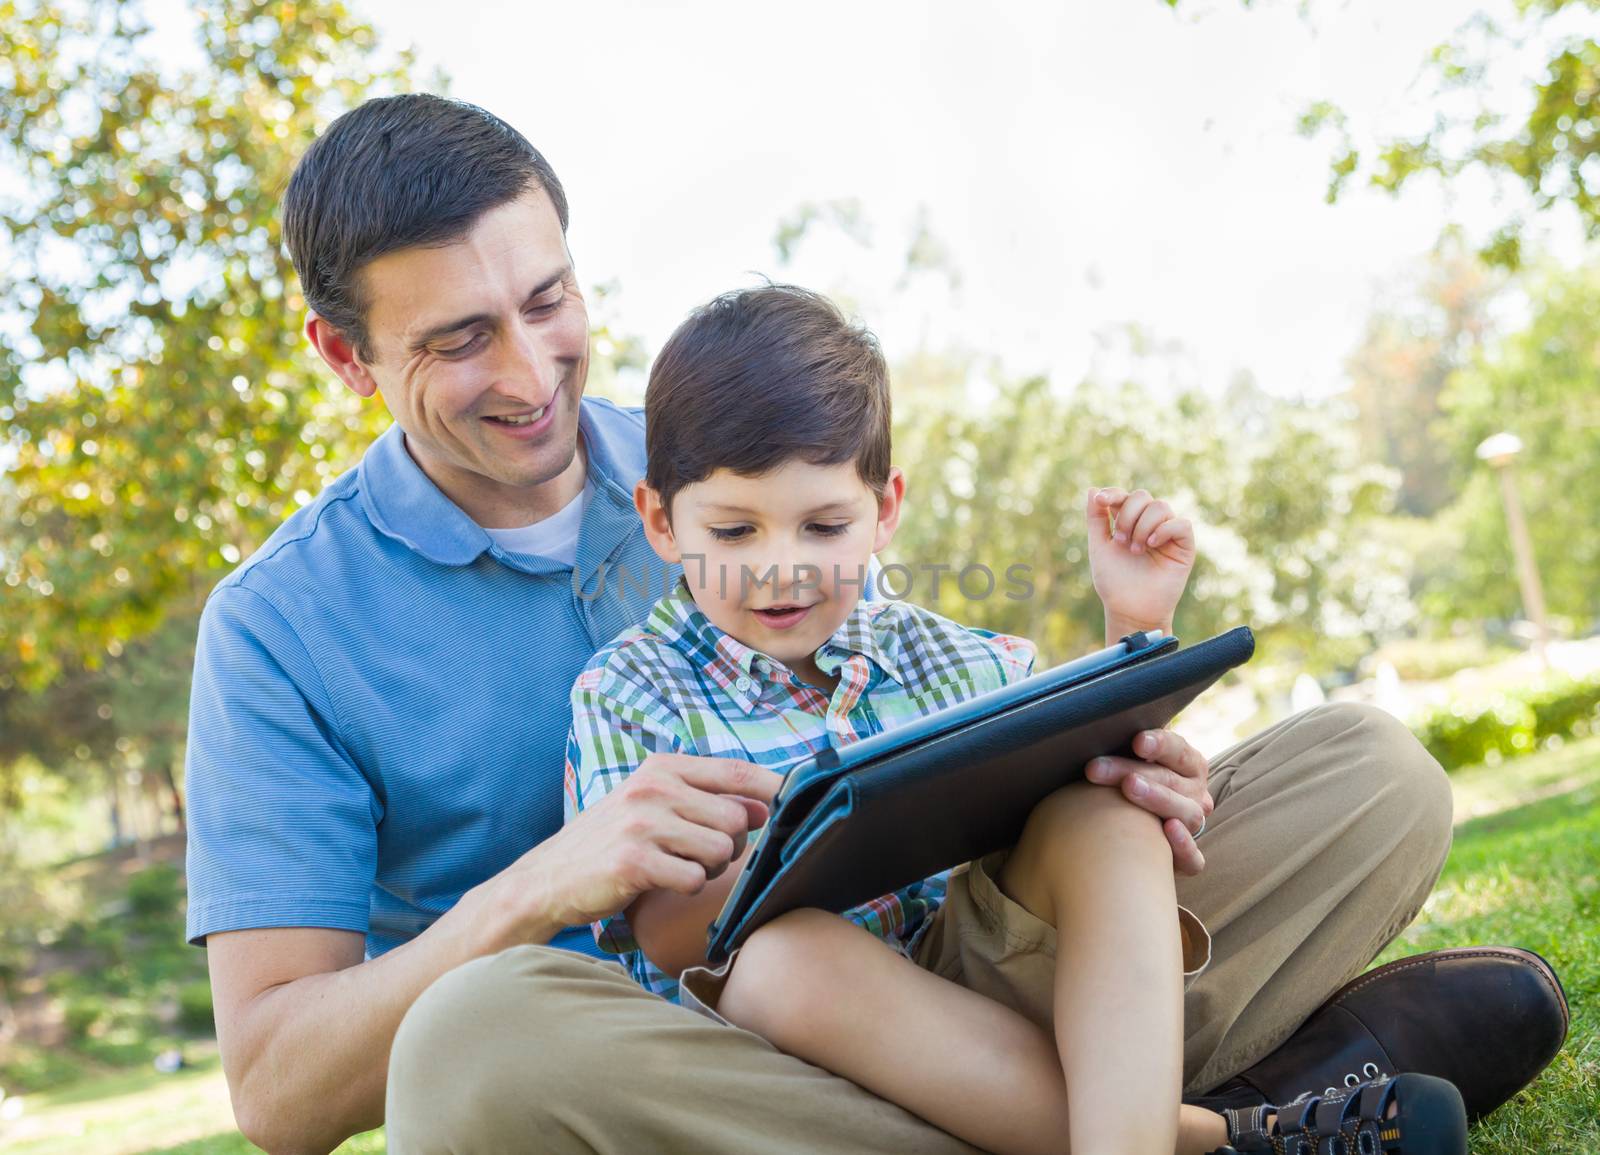 Happy Father and Son Playing on a Computer Tablet Outside.